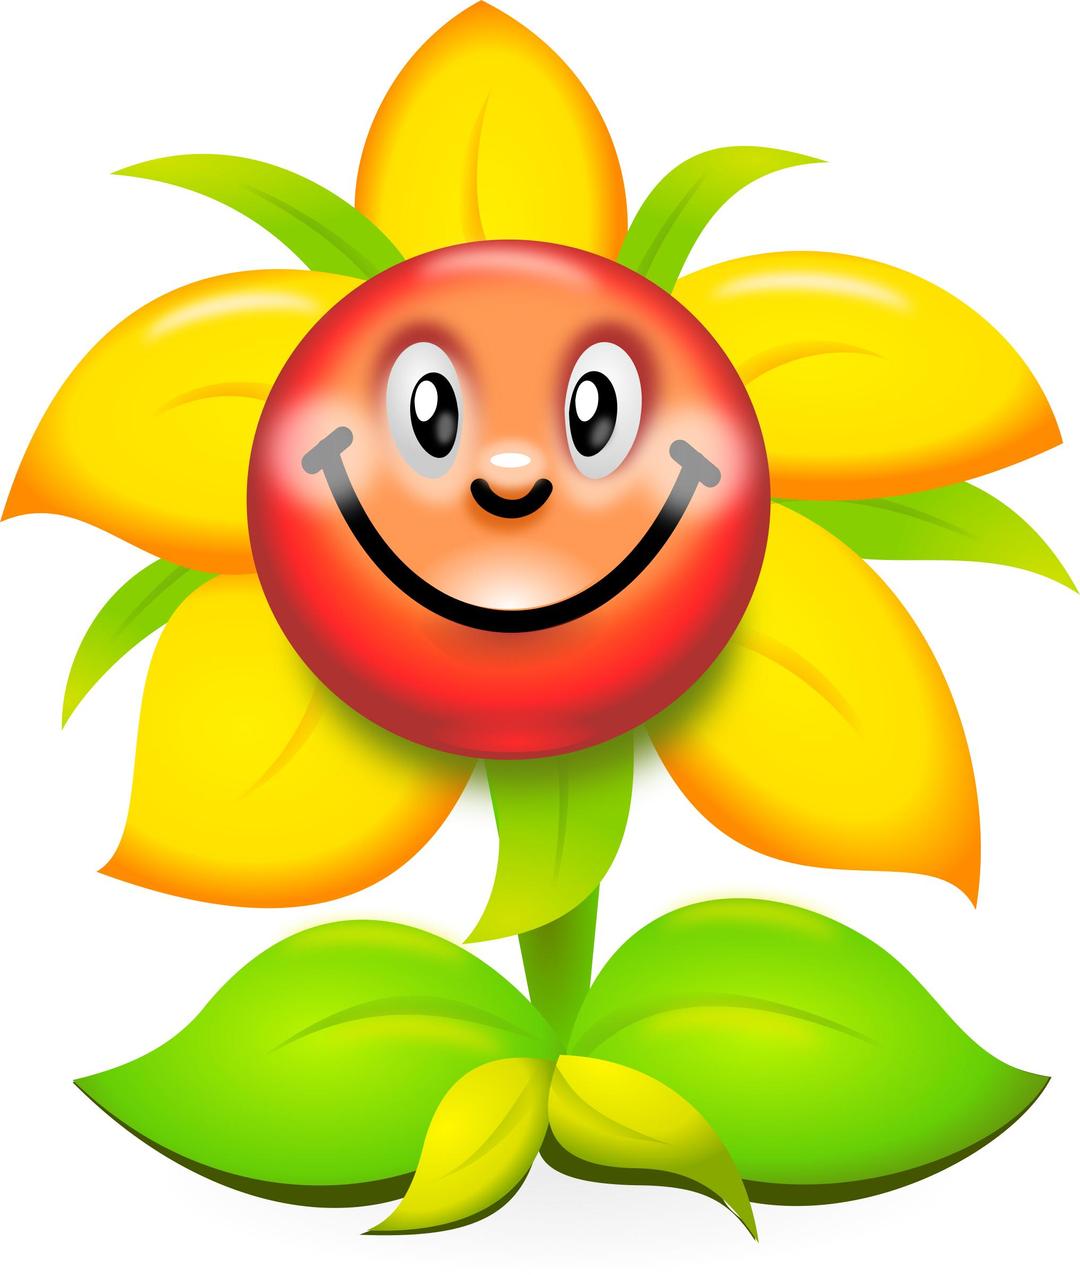 Funny Yellow Flower Character - superb production quality png transparent